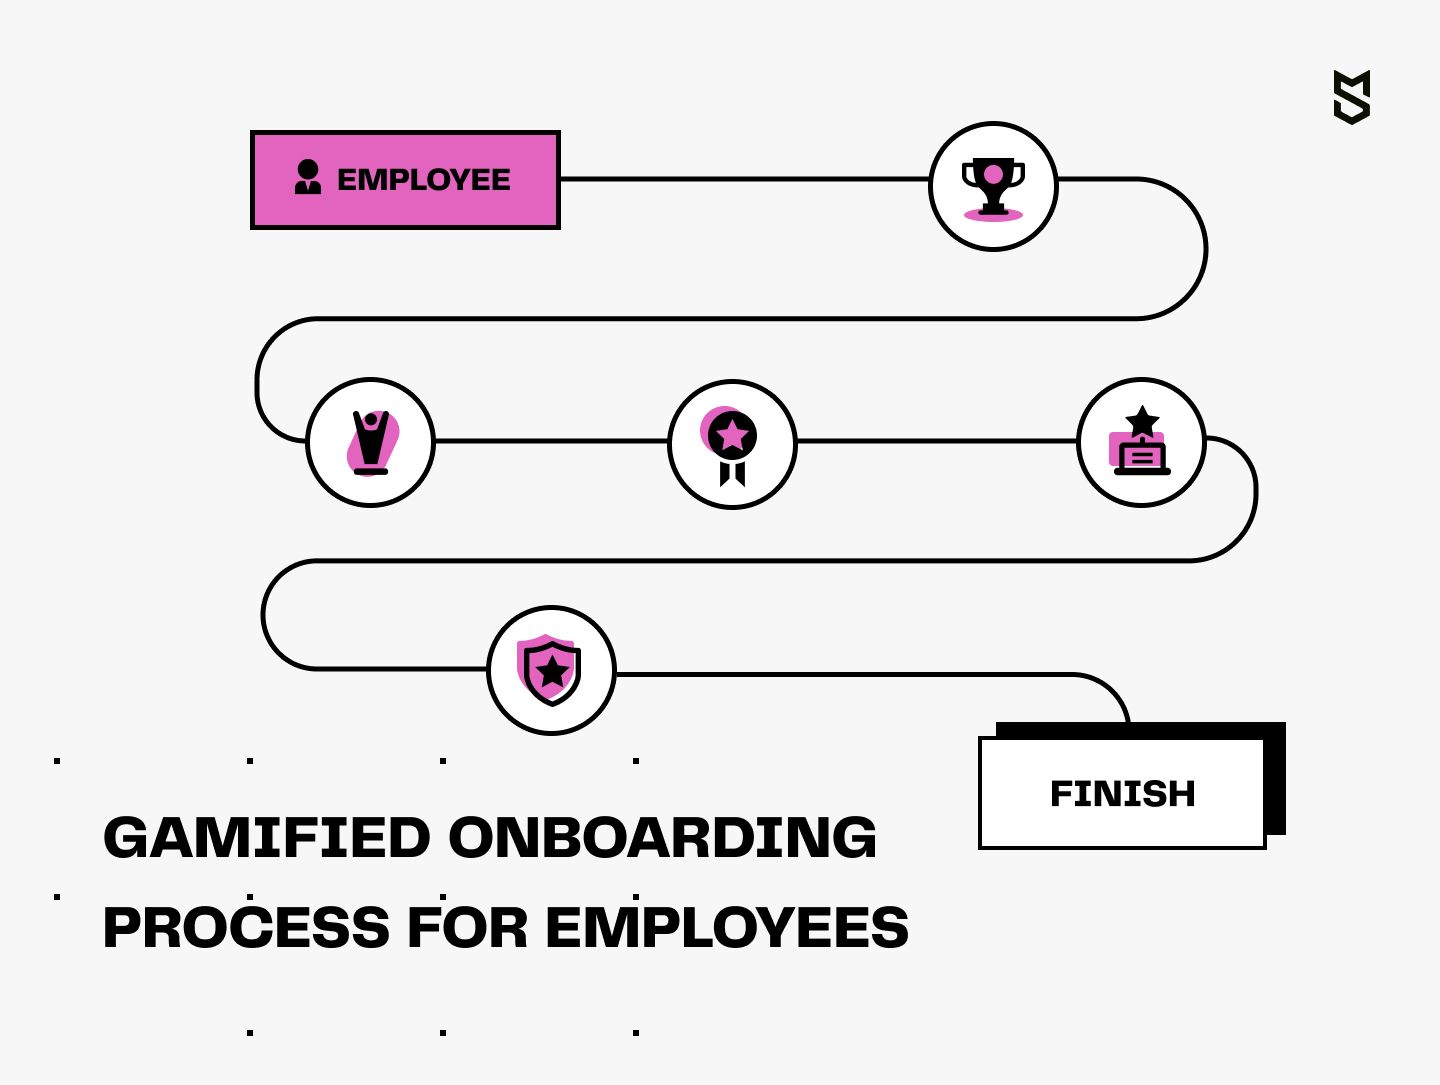 Gamified onboarding process for employees